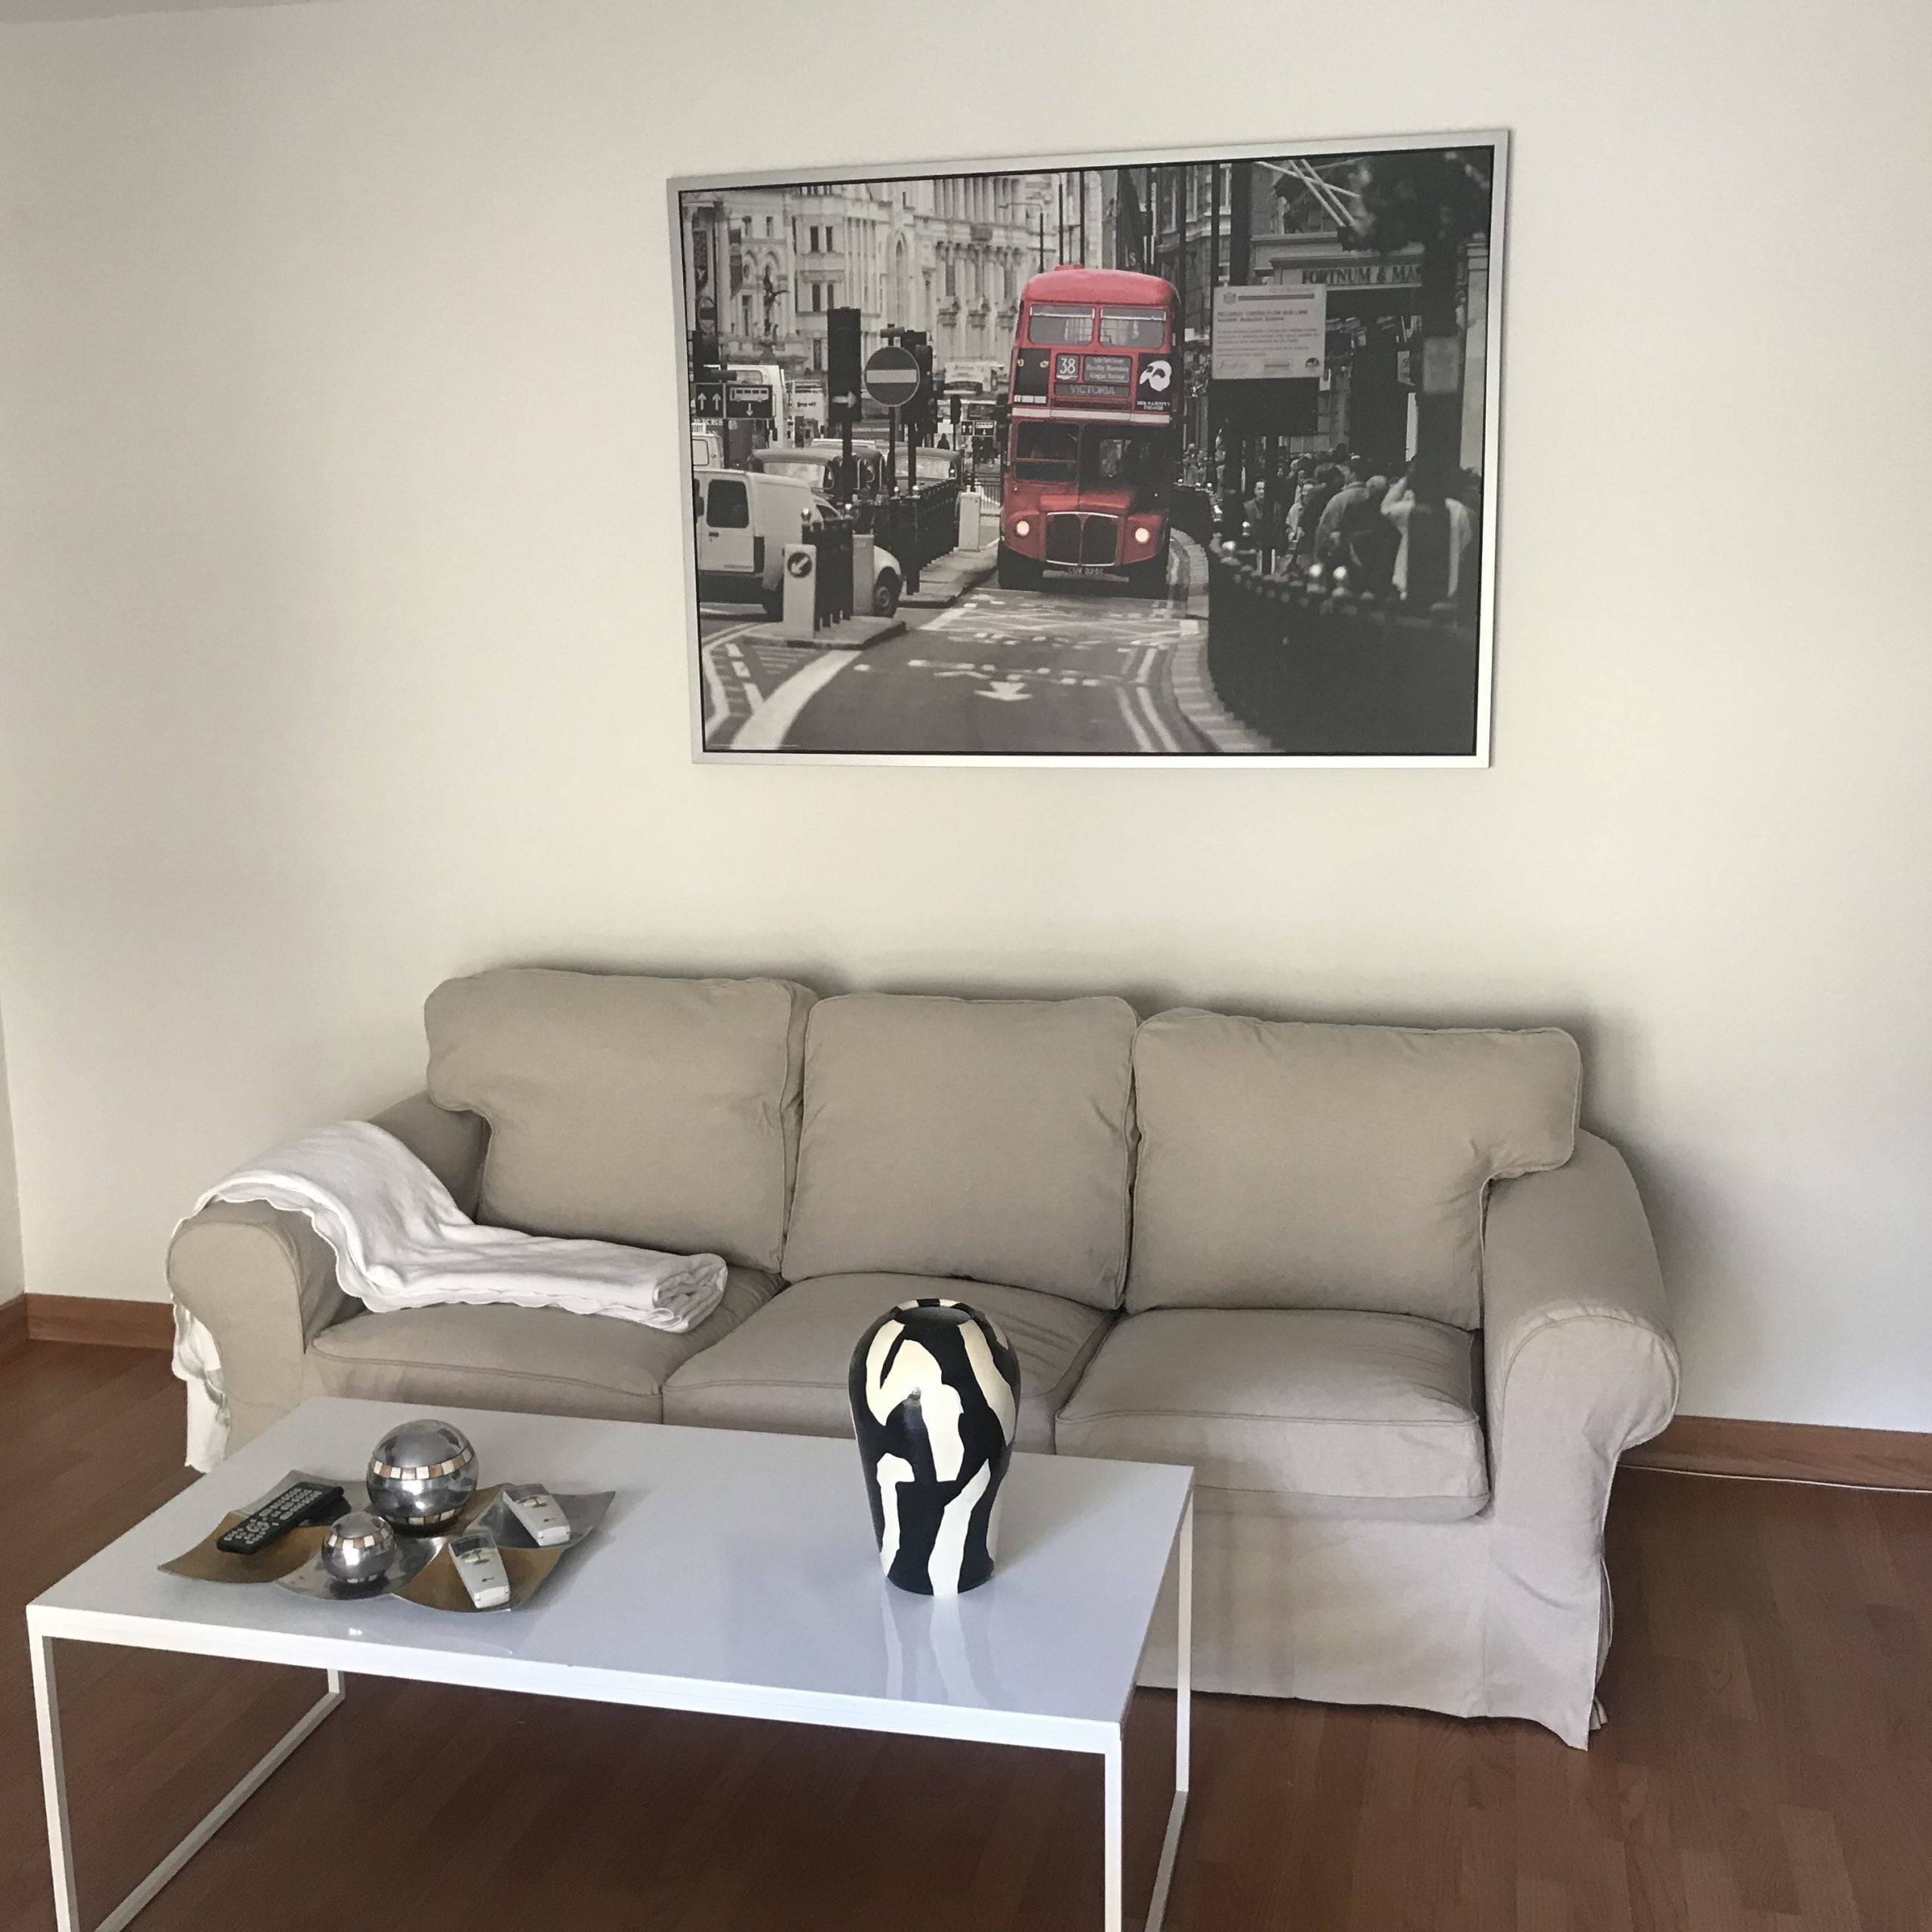 Furnished expat apartment in Sevilla